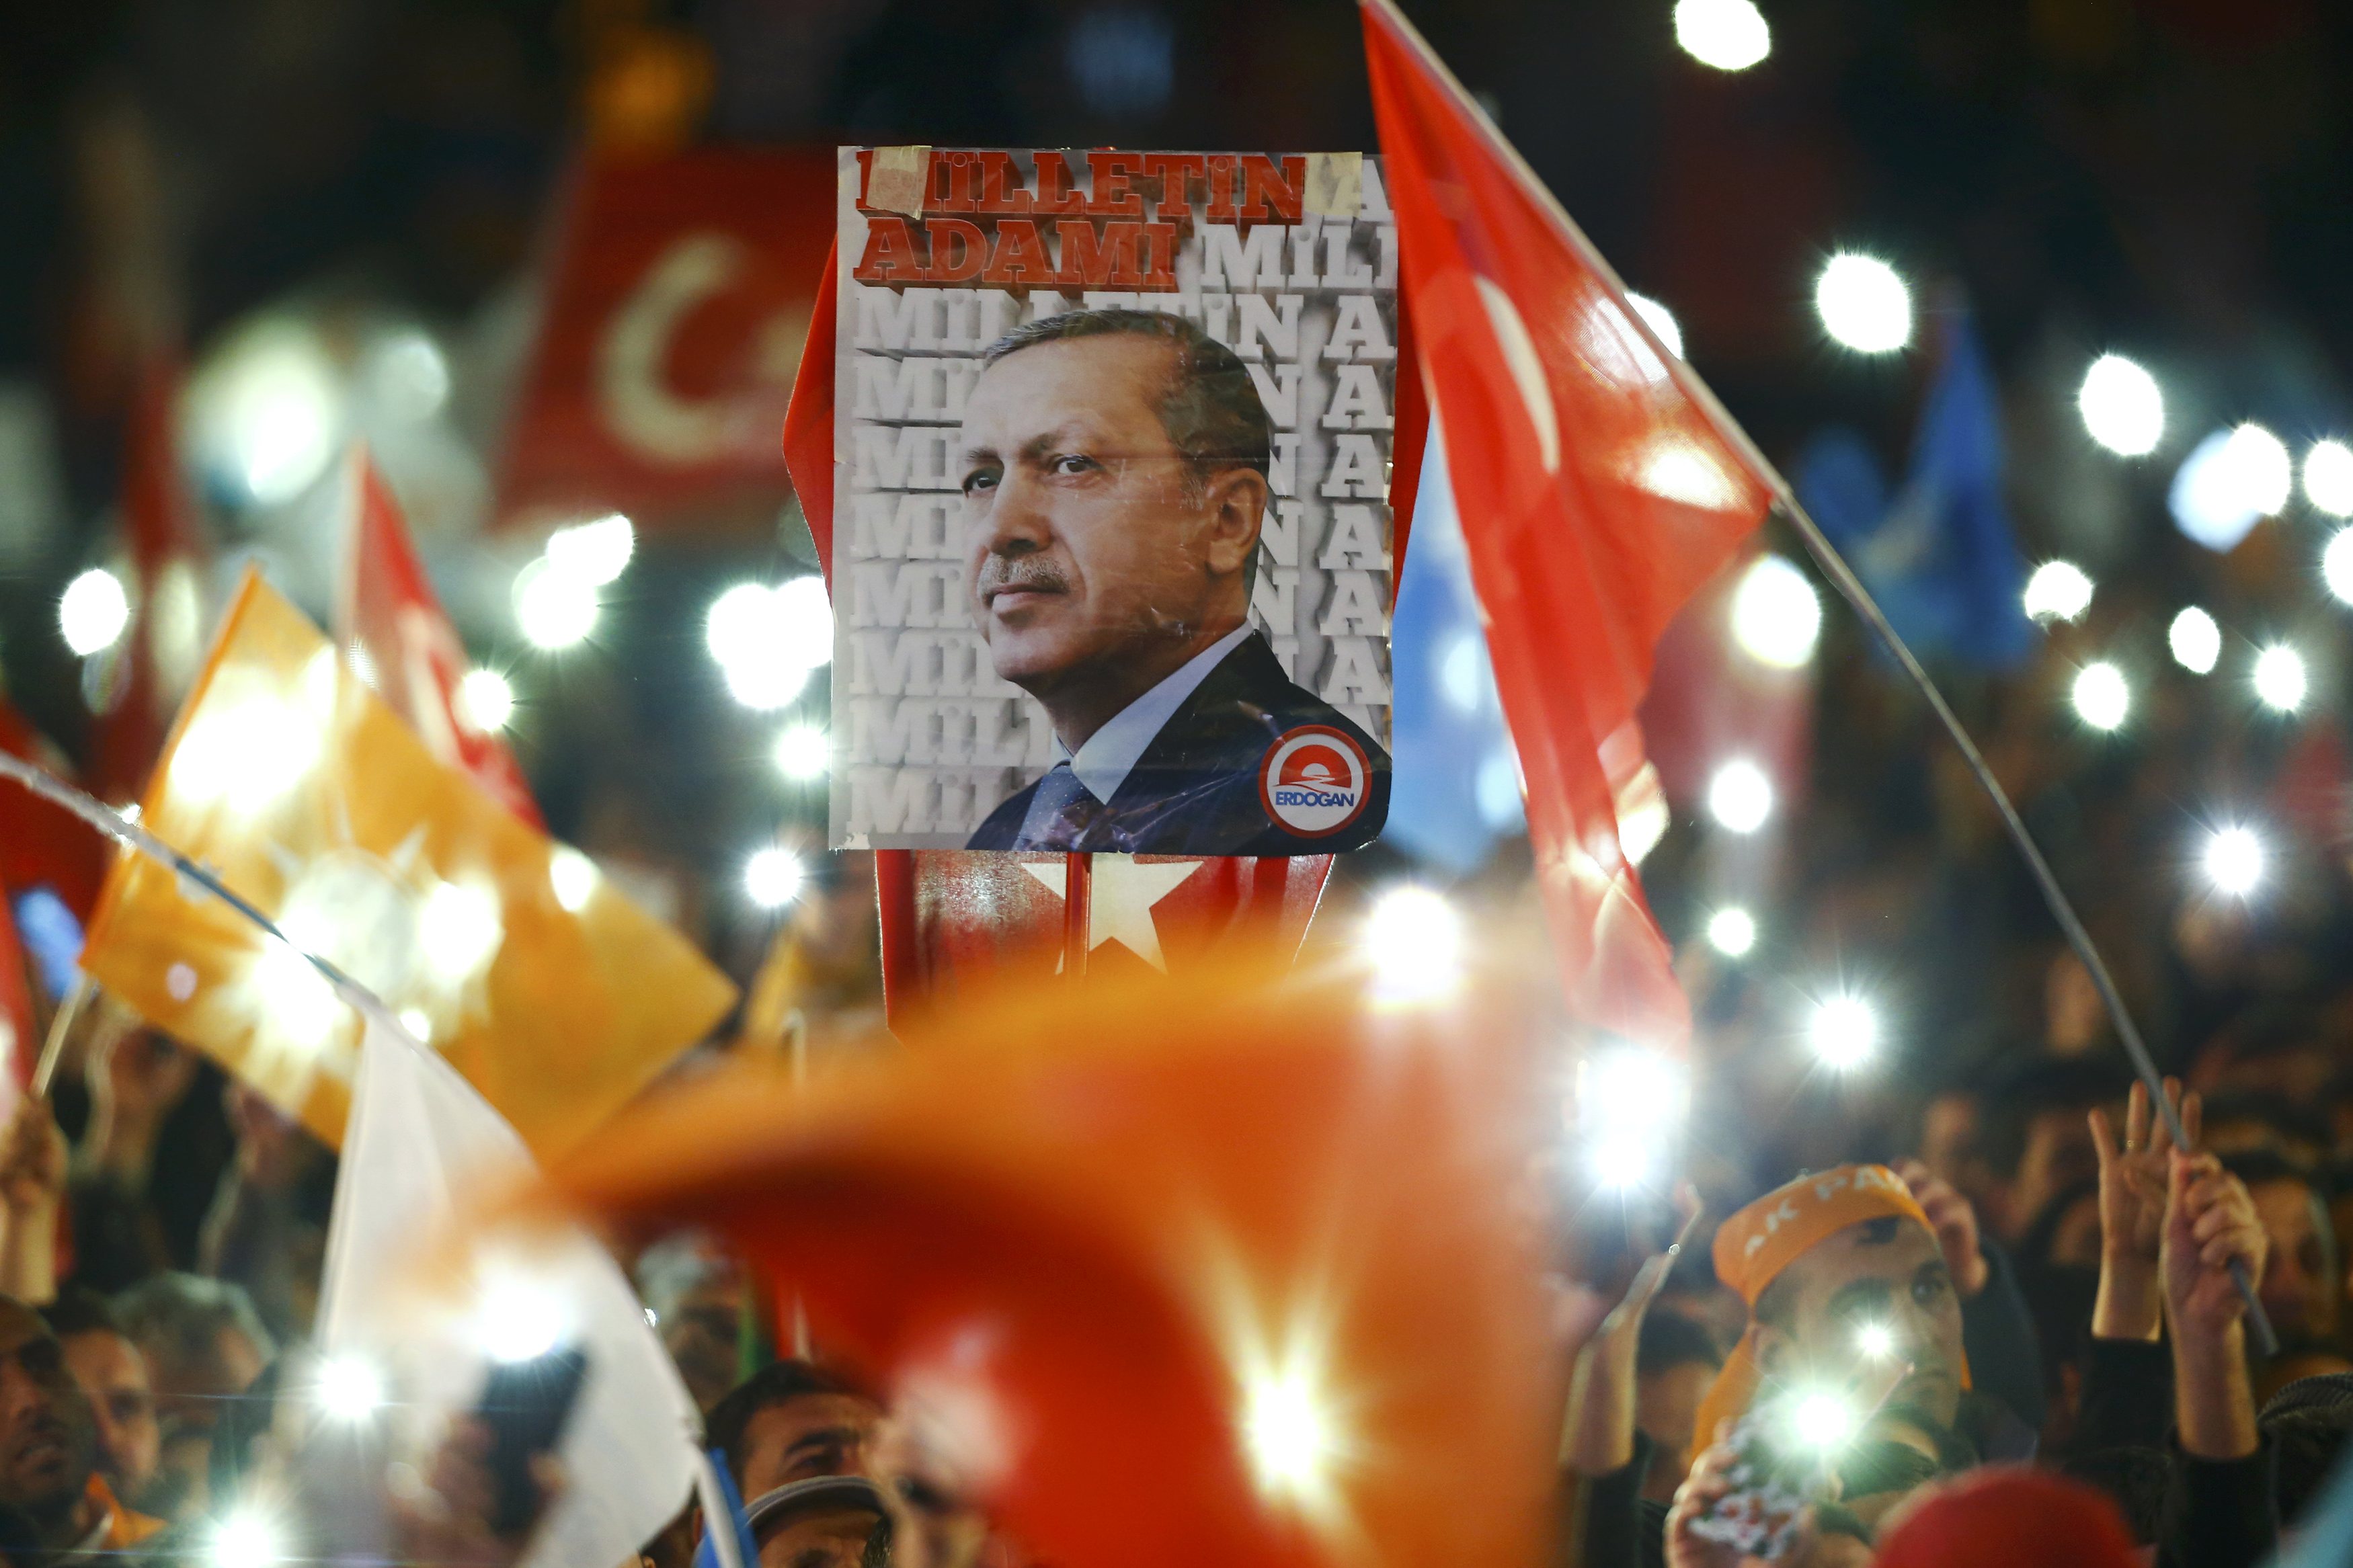 People wave flags and hold a portrait of Turkish President Tayyip Erdogan as they wait for the arrival of Prime Minister Ahmet Davutoglu in Ankara, Turkey November 2, 2015. Davutoglu described the outcome of a general election which swept his AK Party back to a parliamentary majority on Sunday as a victory for democracy. REUTERS/Umit Bektas